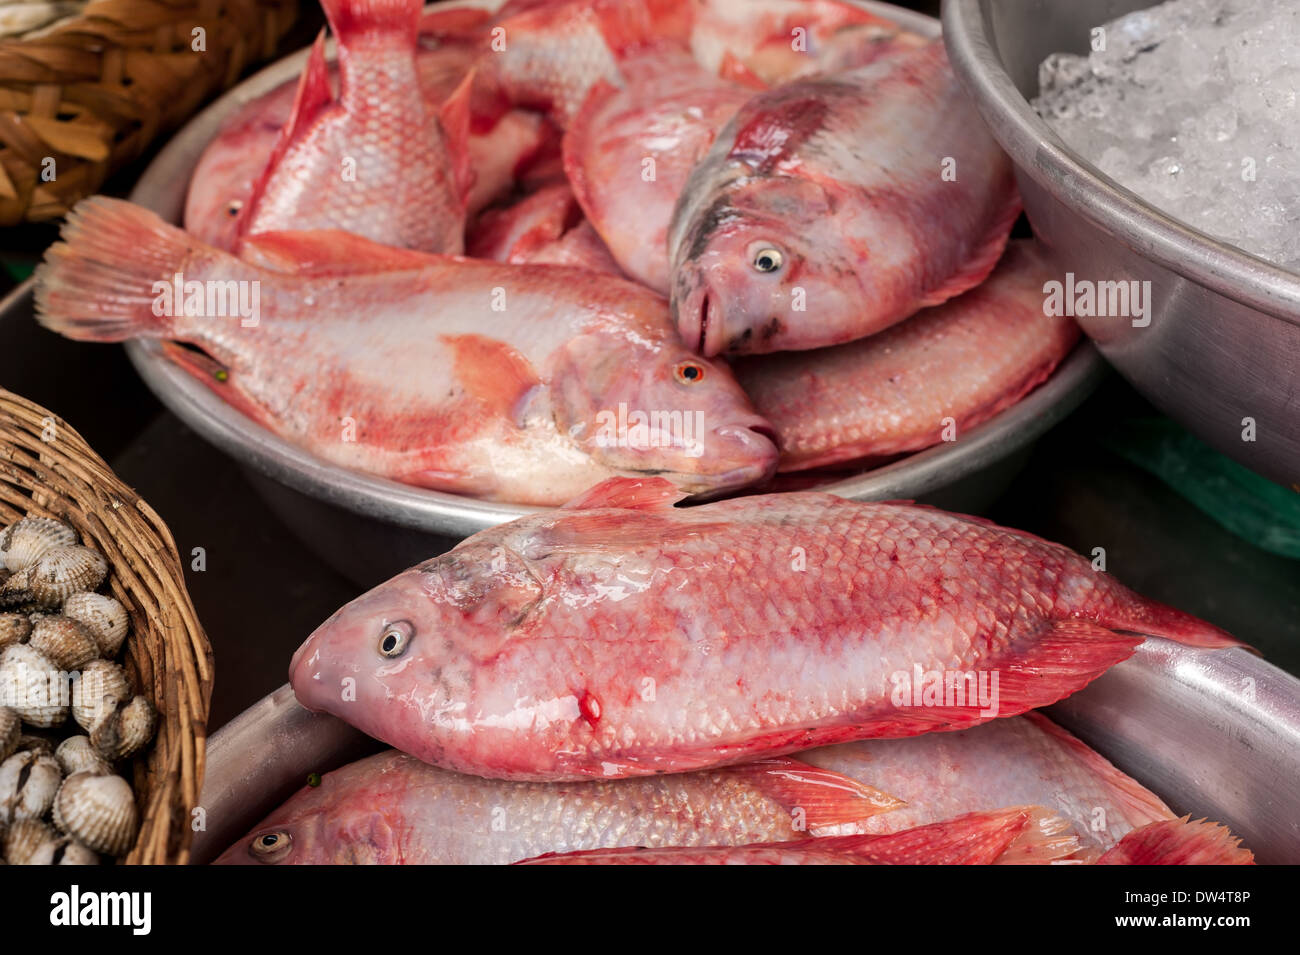 Raw fresh seafood, fish and clams for sale at asian food market Stock Photo